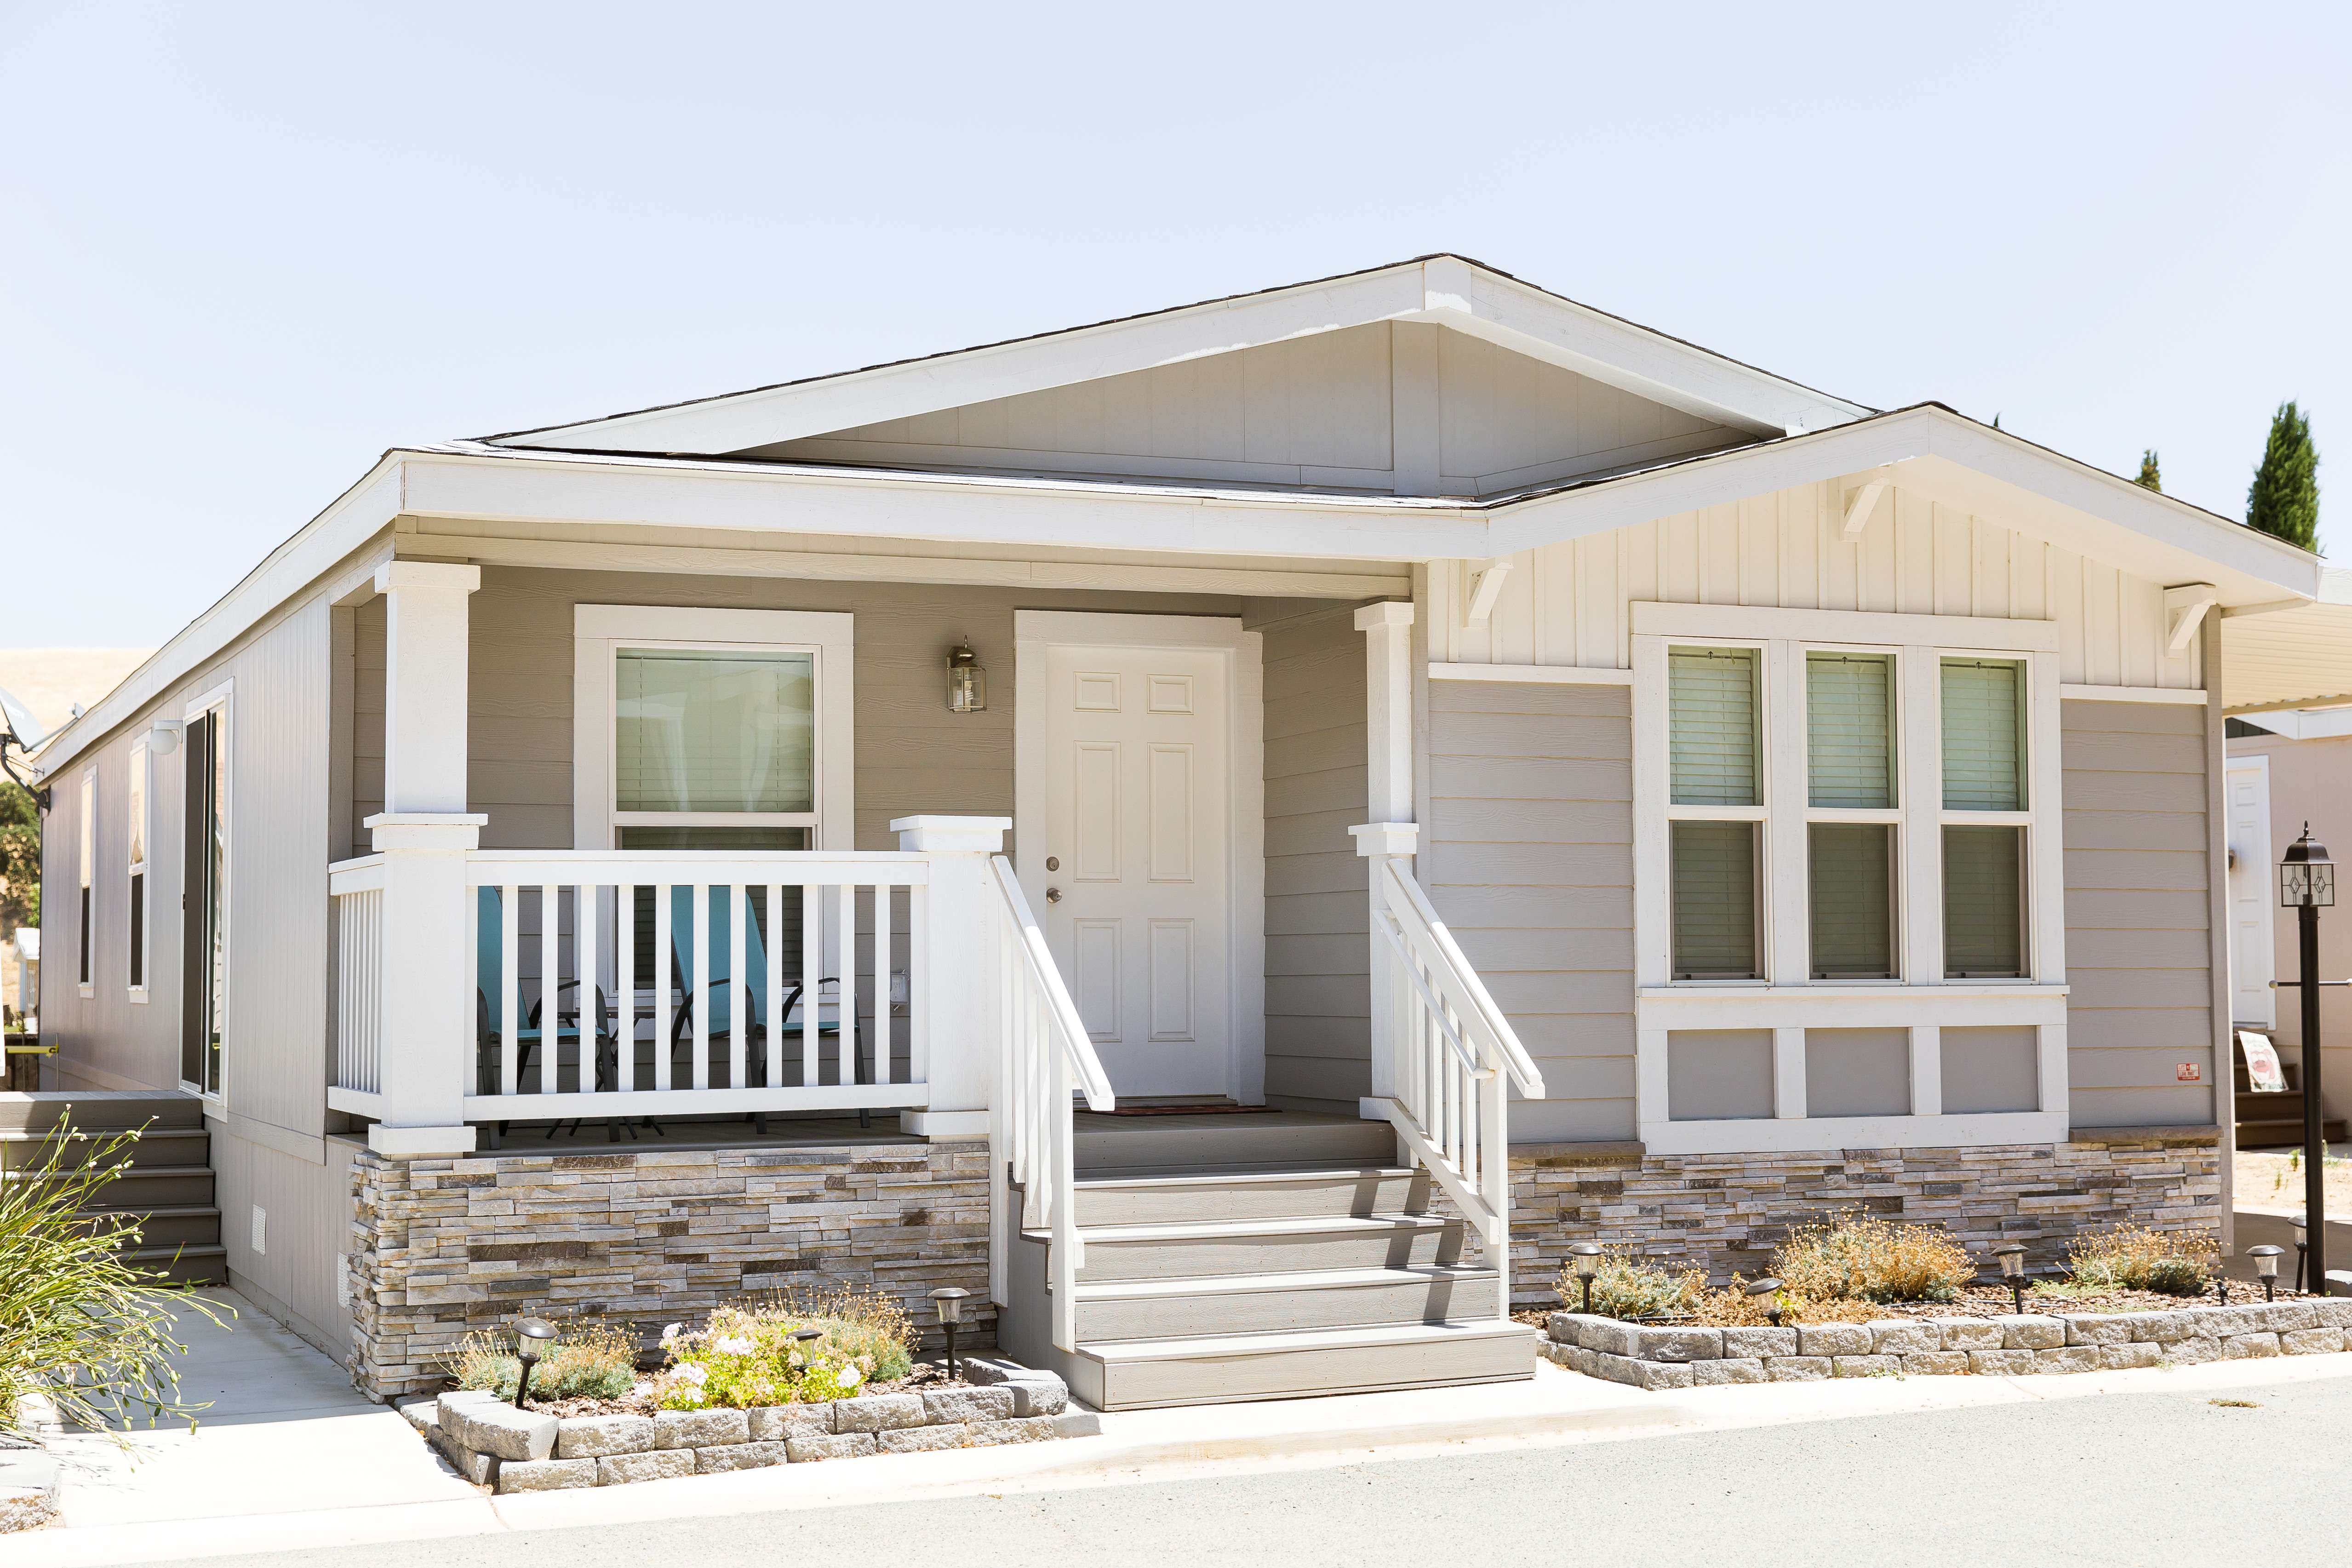 The exterior of a manufactured home featuring a spacious front porch and stone accents on the bottom portion of the home with landscaping in the front.